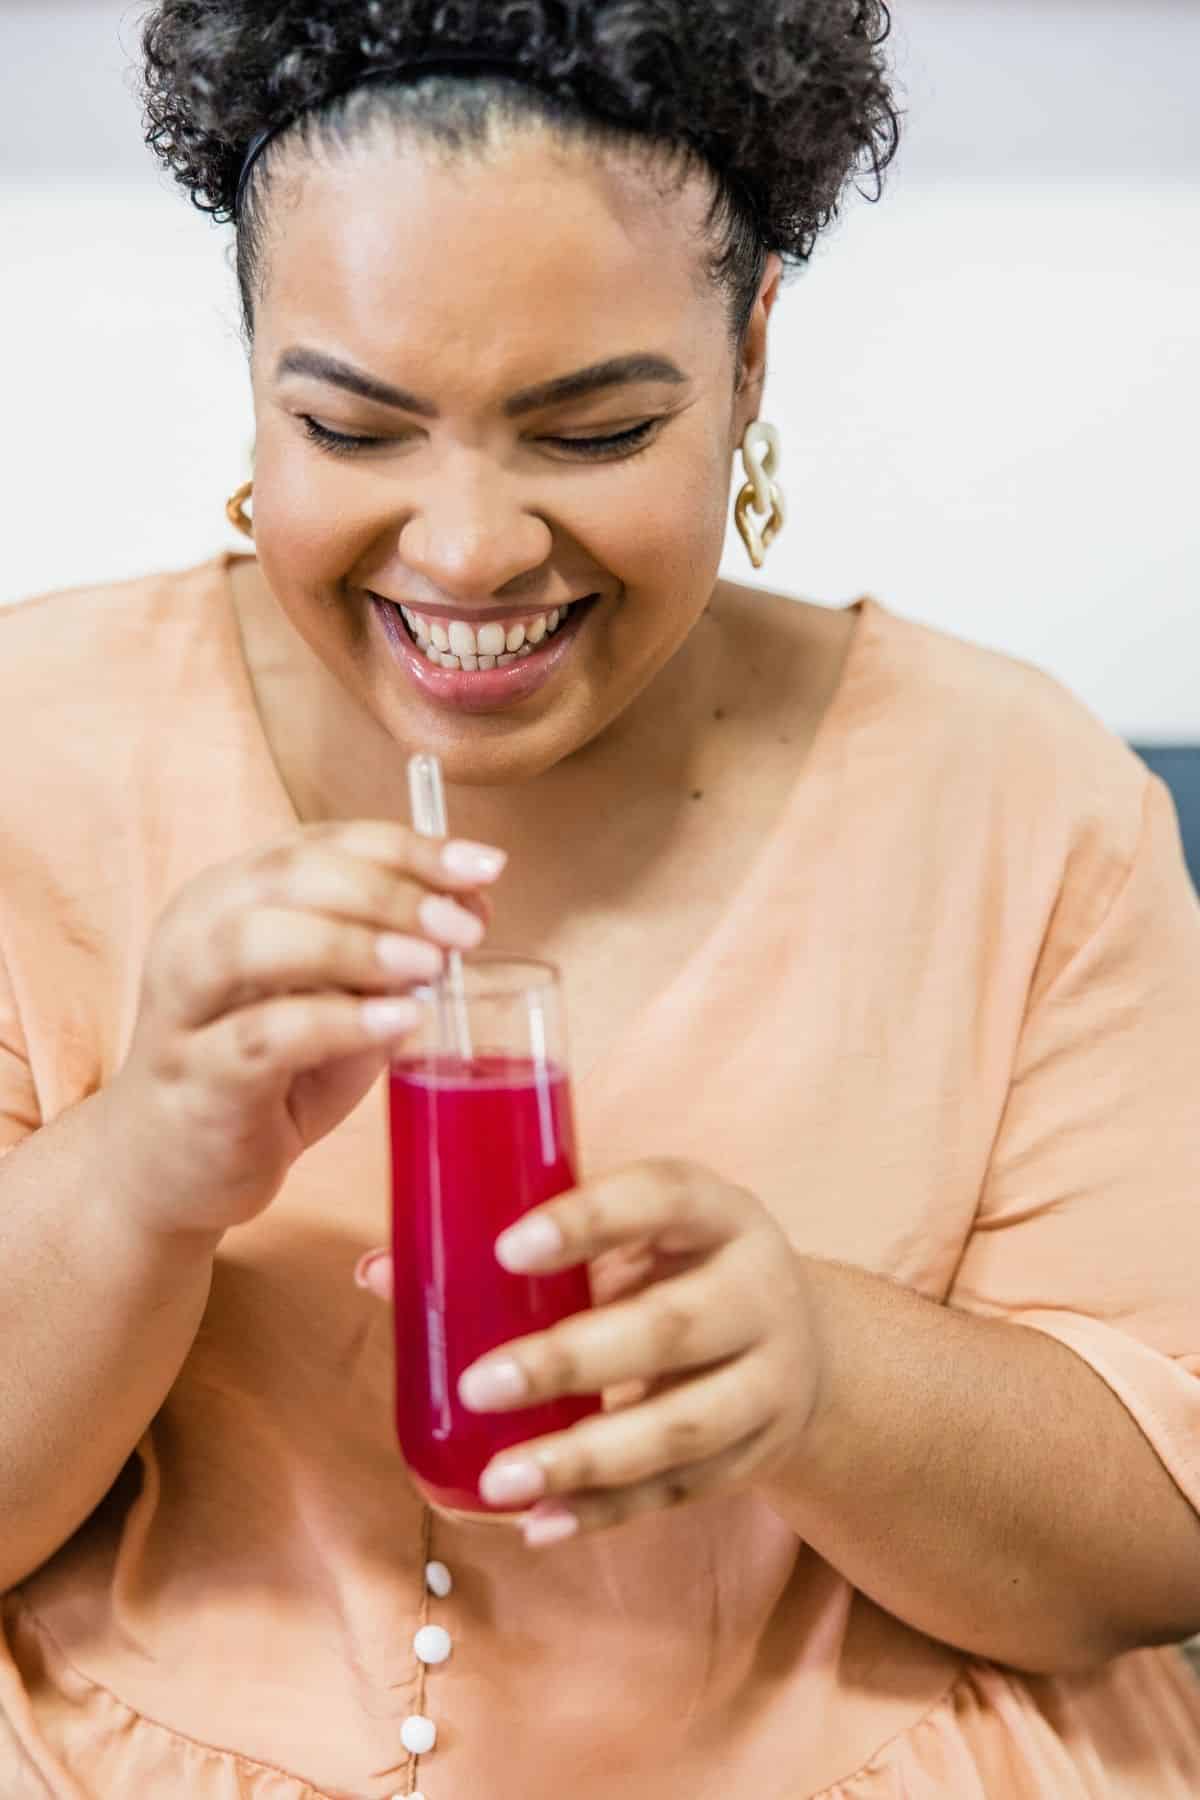 woman drinking a glass of beet juice